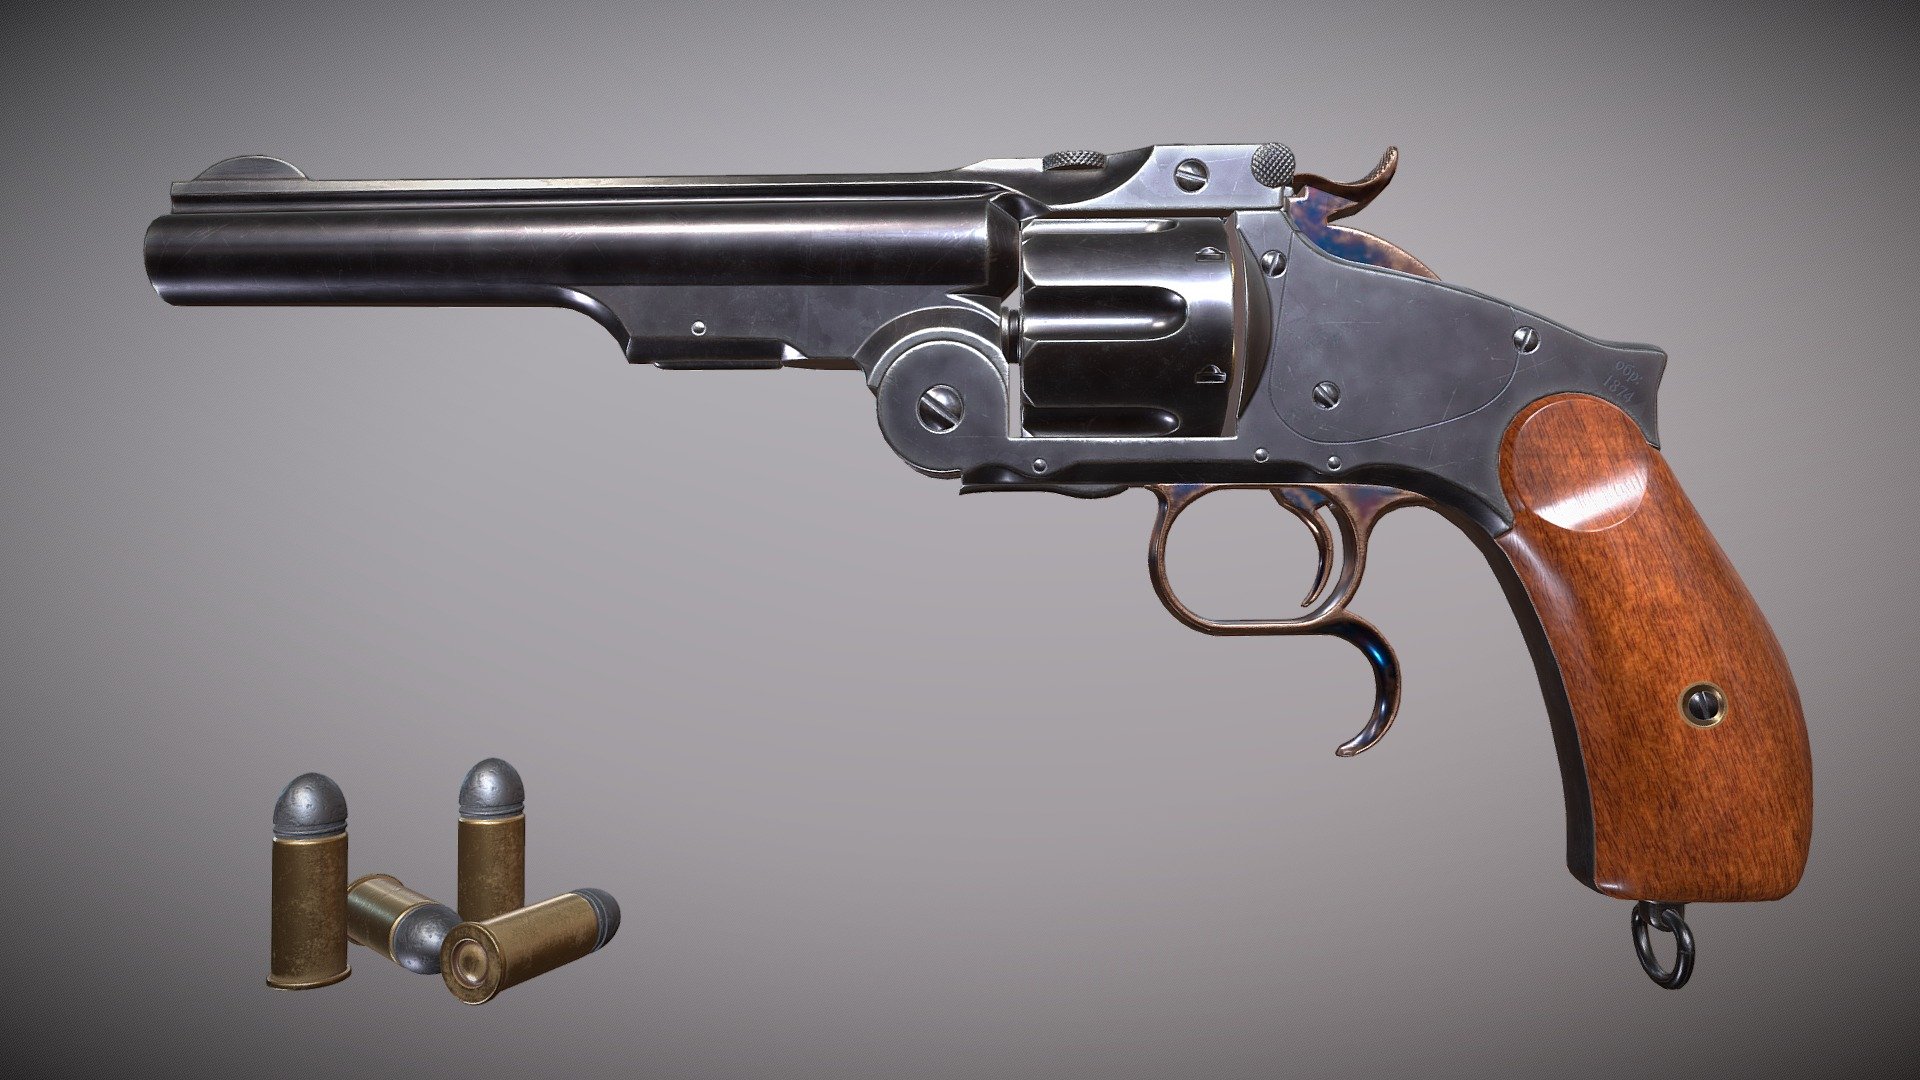 The Smith &amp; Wesson Model 3 is a single-action, cartridge-firing, top-break revolver produced by Smith &amp; Wesson (S&amp;W) from around 1870 to 1915, and was recently again offered as a reproduction by Smith &amp; Wesson and Uberti.

It was produced in several variations and subvariations, including both the &ldquo;Russian